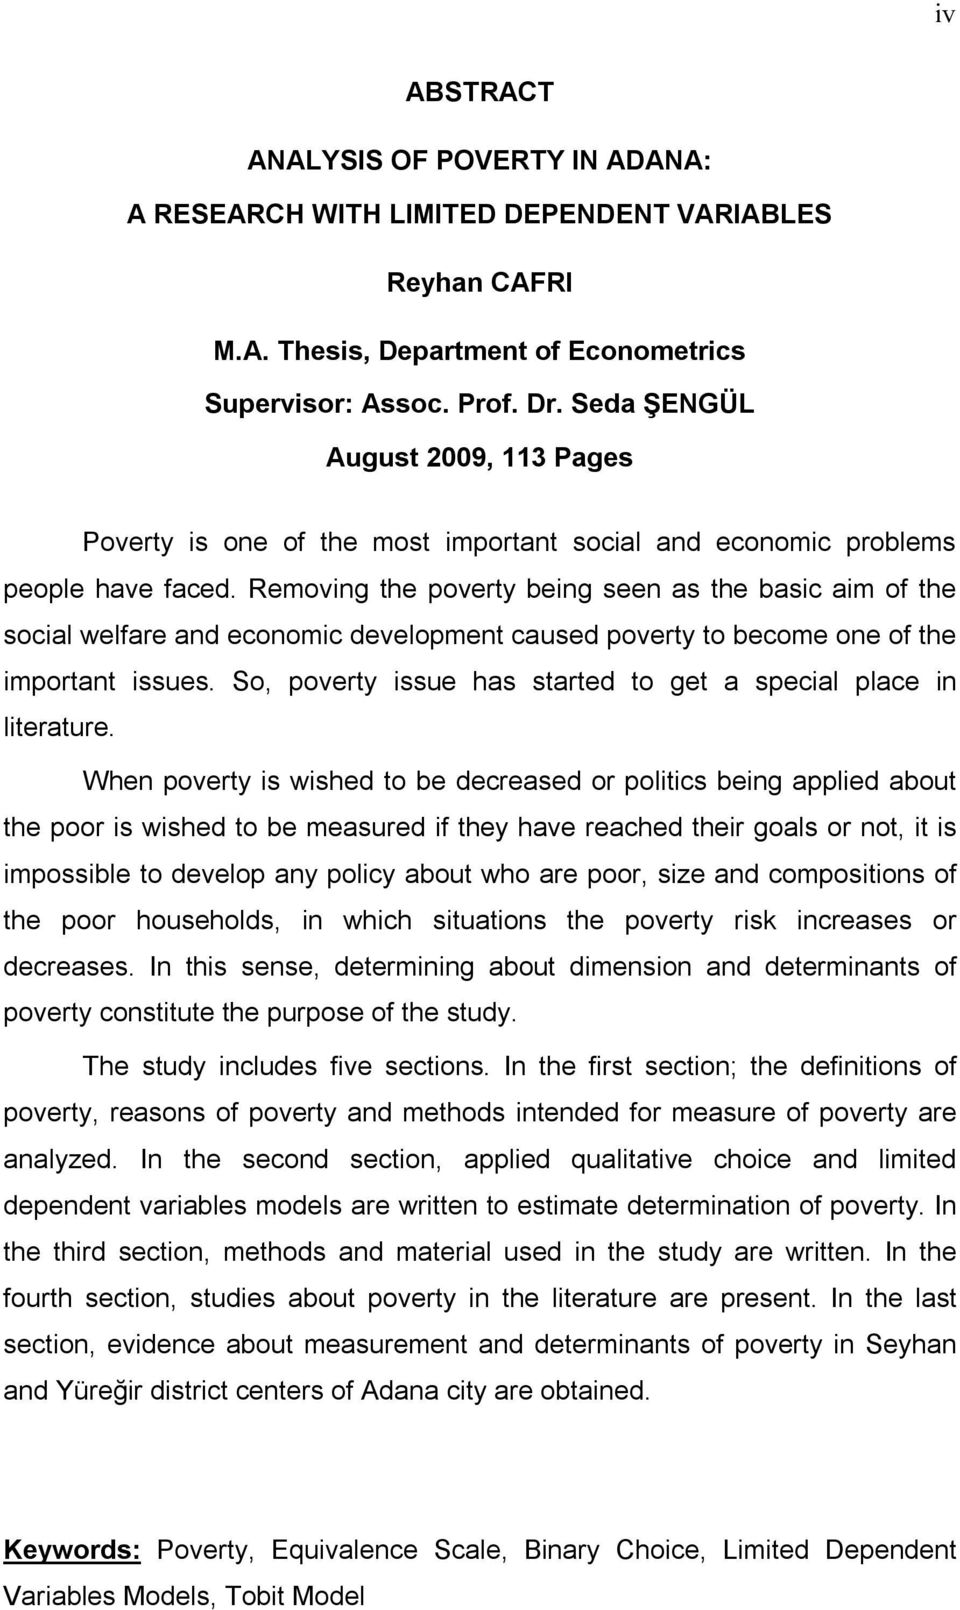 Removng the poverty beng seen as the basc am of the socal welfare and economc development caused poverty to become one of the mportant ssues.